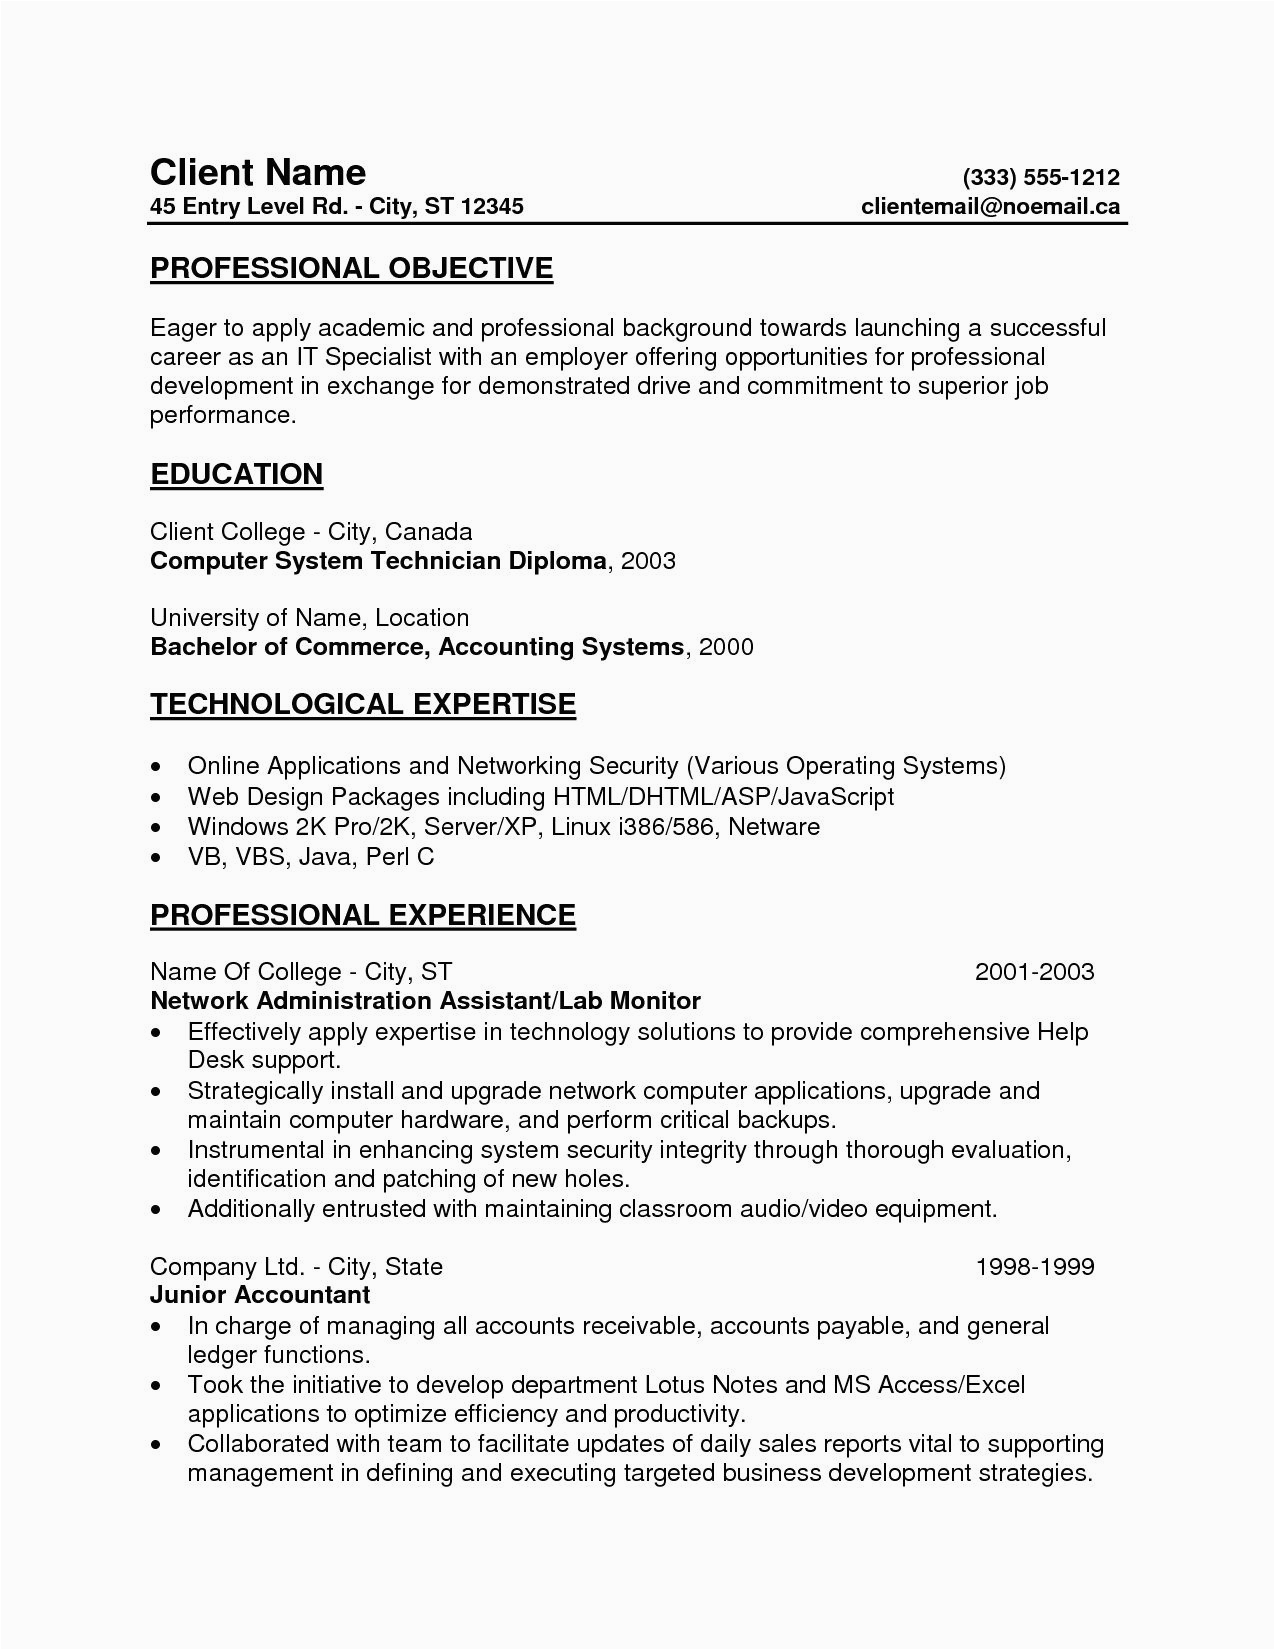 Sample Resume Objective for Entry Level Clerical Position Entry Level Fice assistant Resume Unique Free Entry Level Resumes Sam